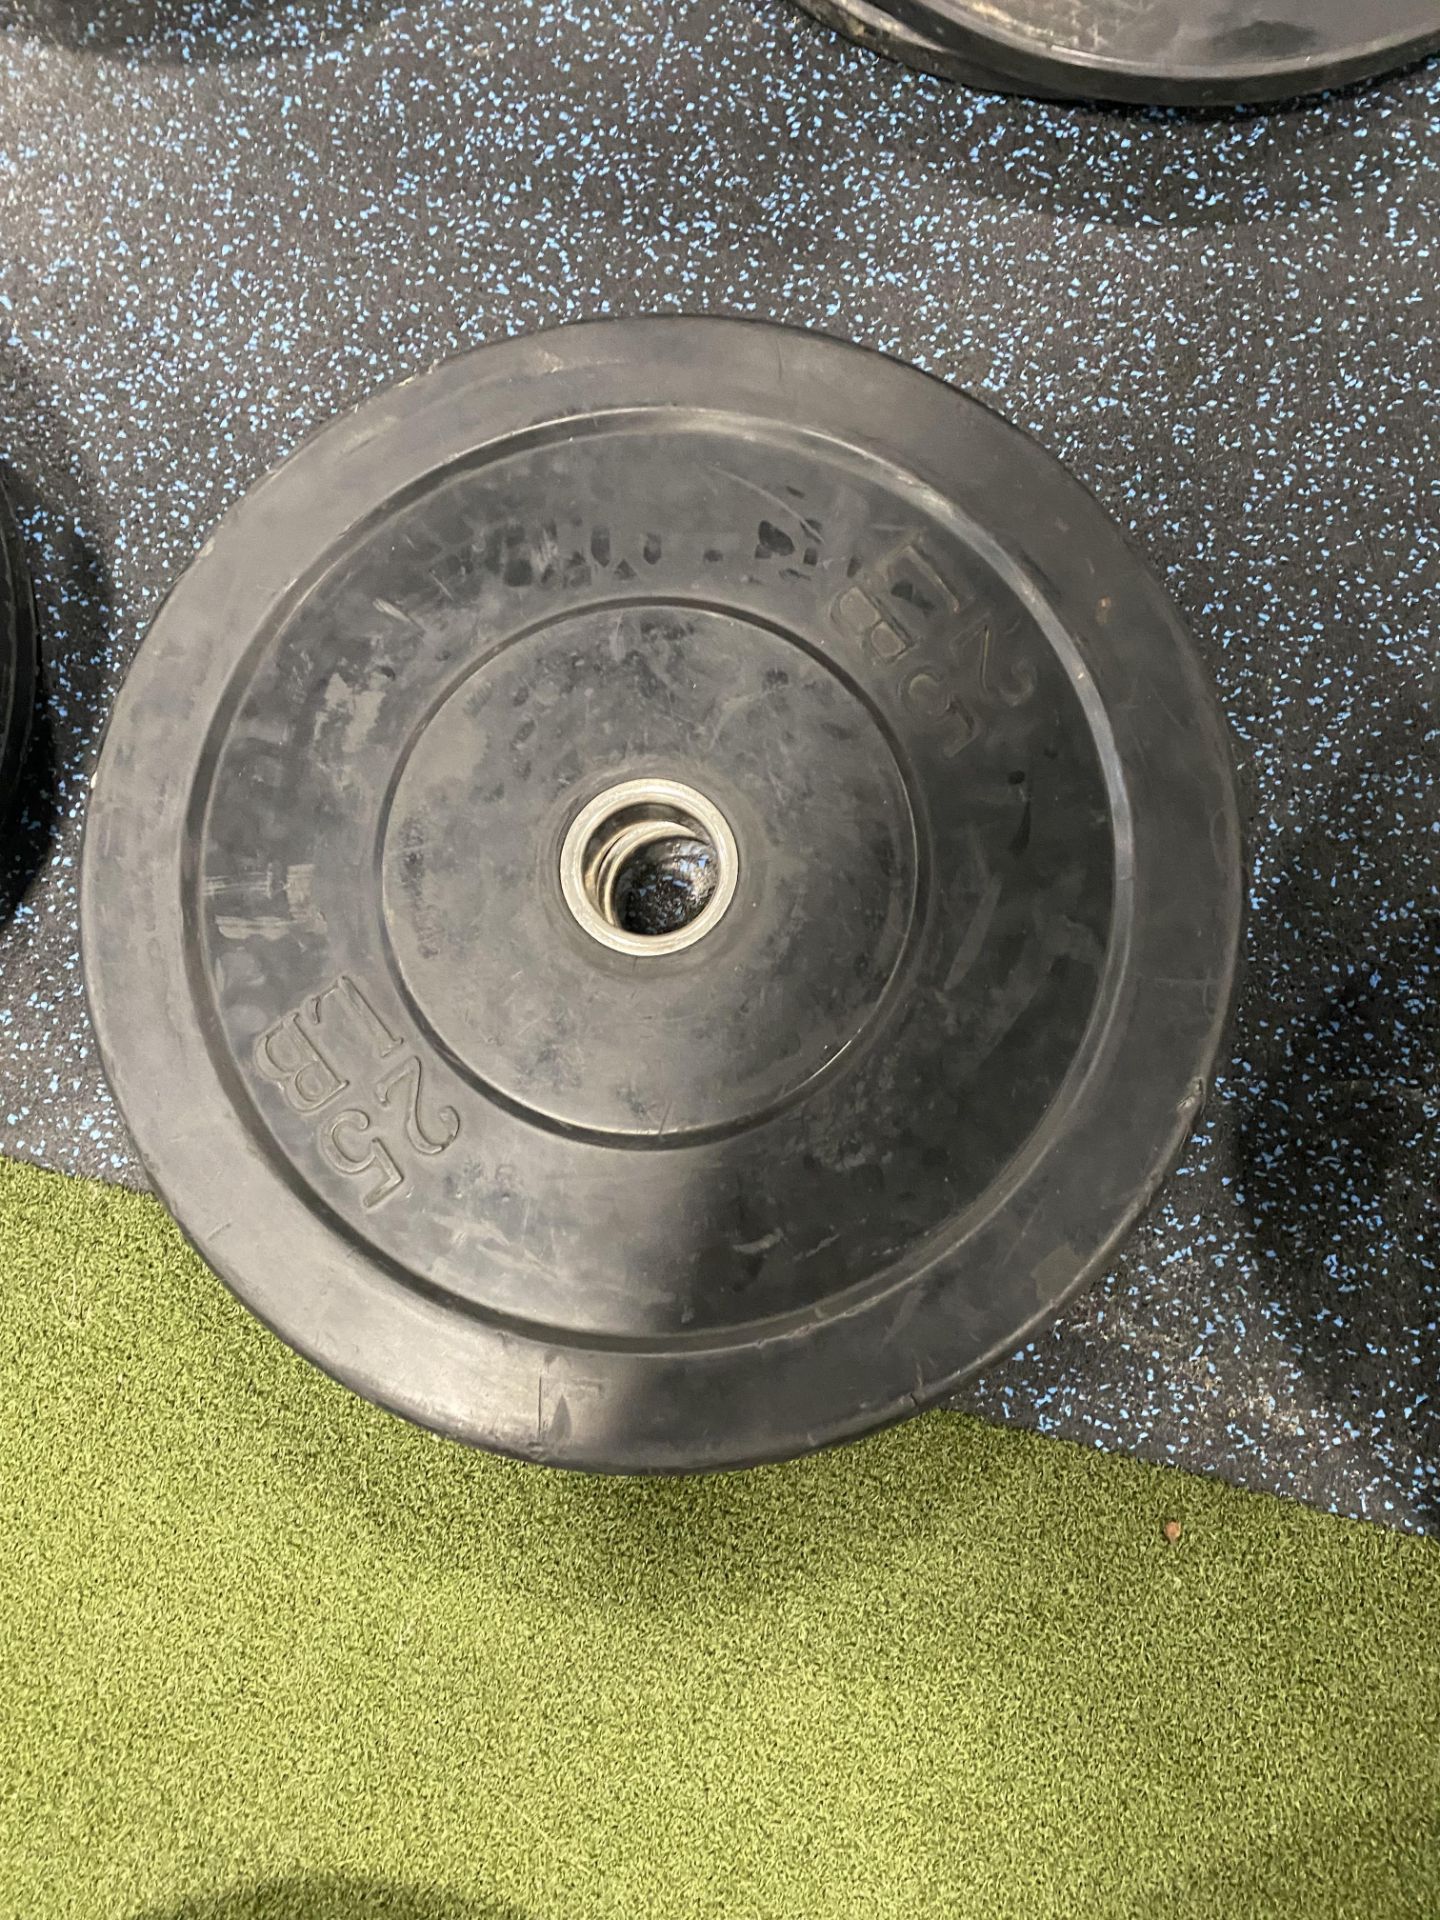 (Lot) (4) 45lb. Plates, (2) 25Lb Bumper Plates, and (2) 10lb Bumper Plates - Image 4 of 5